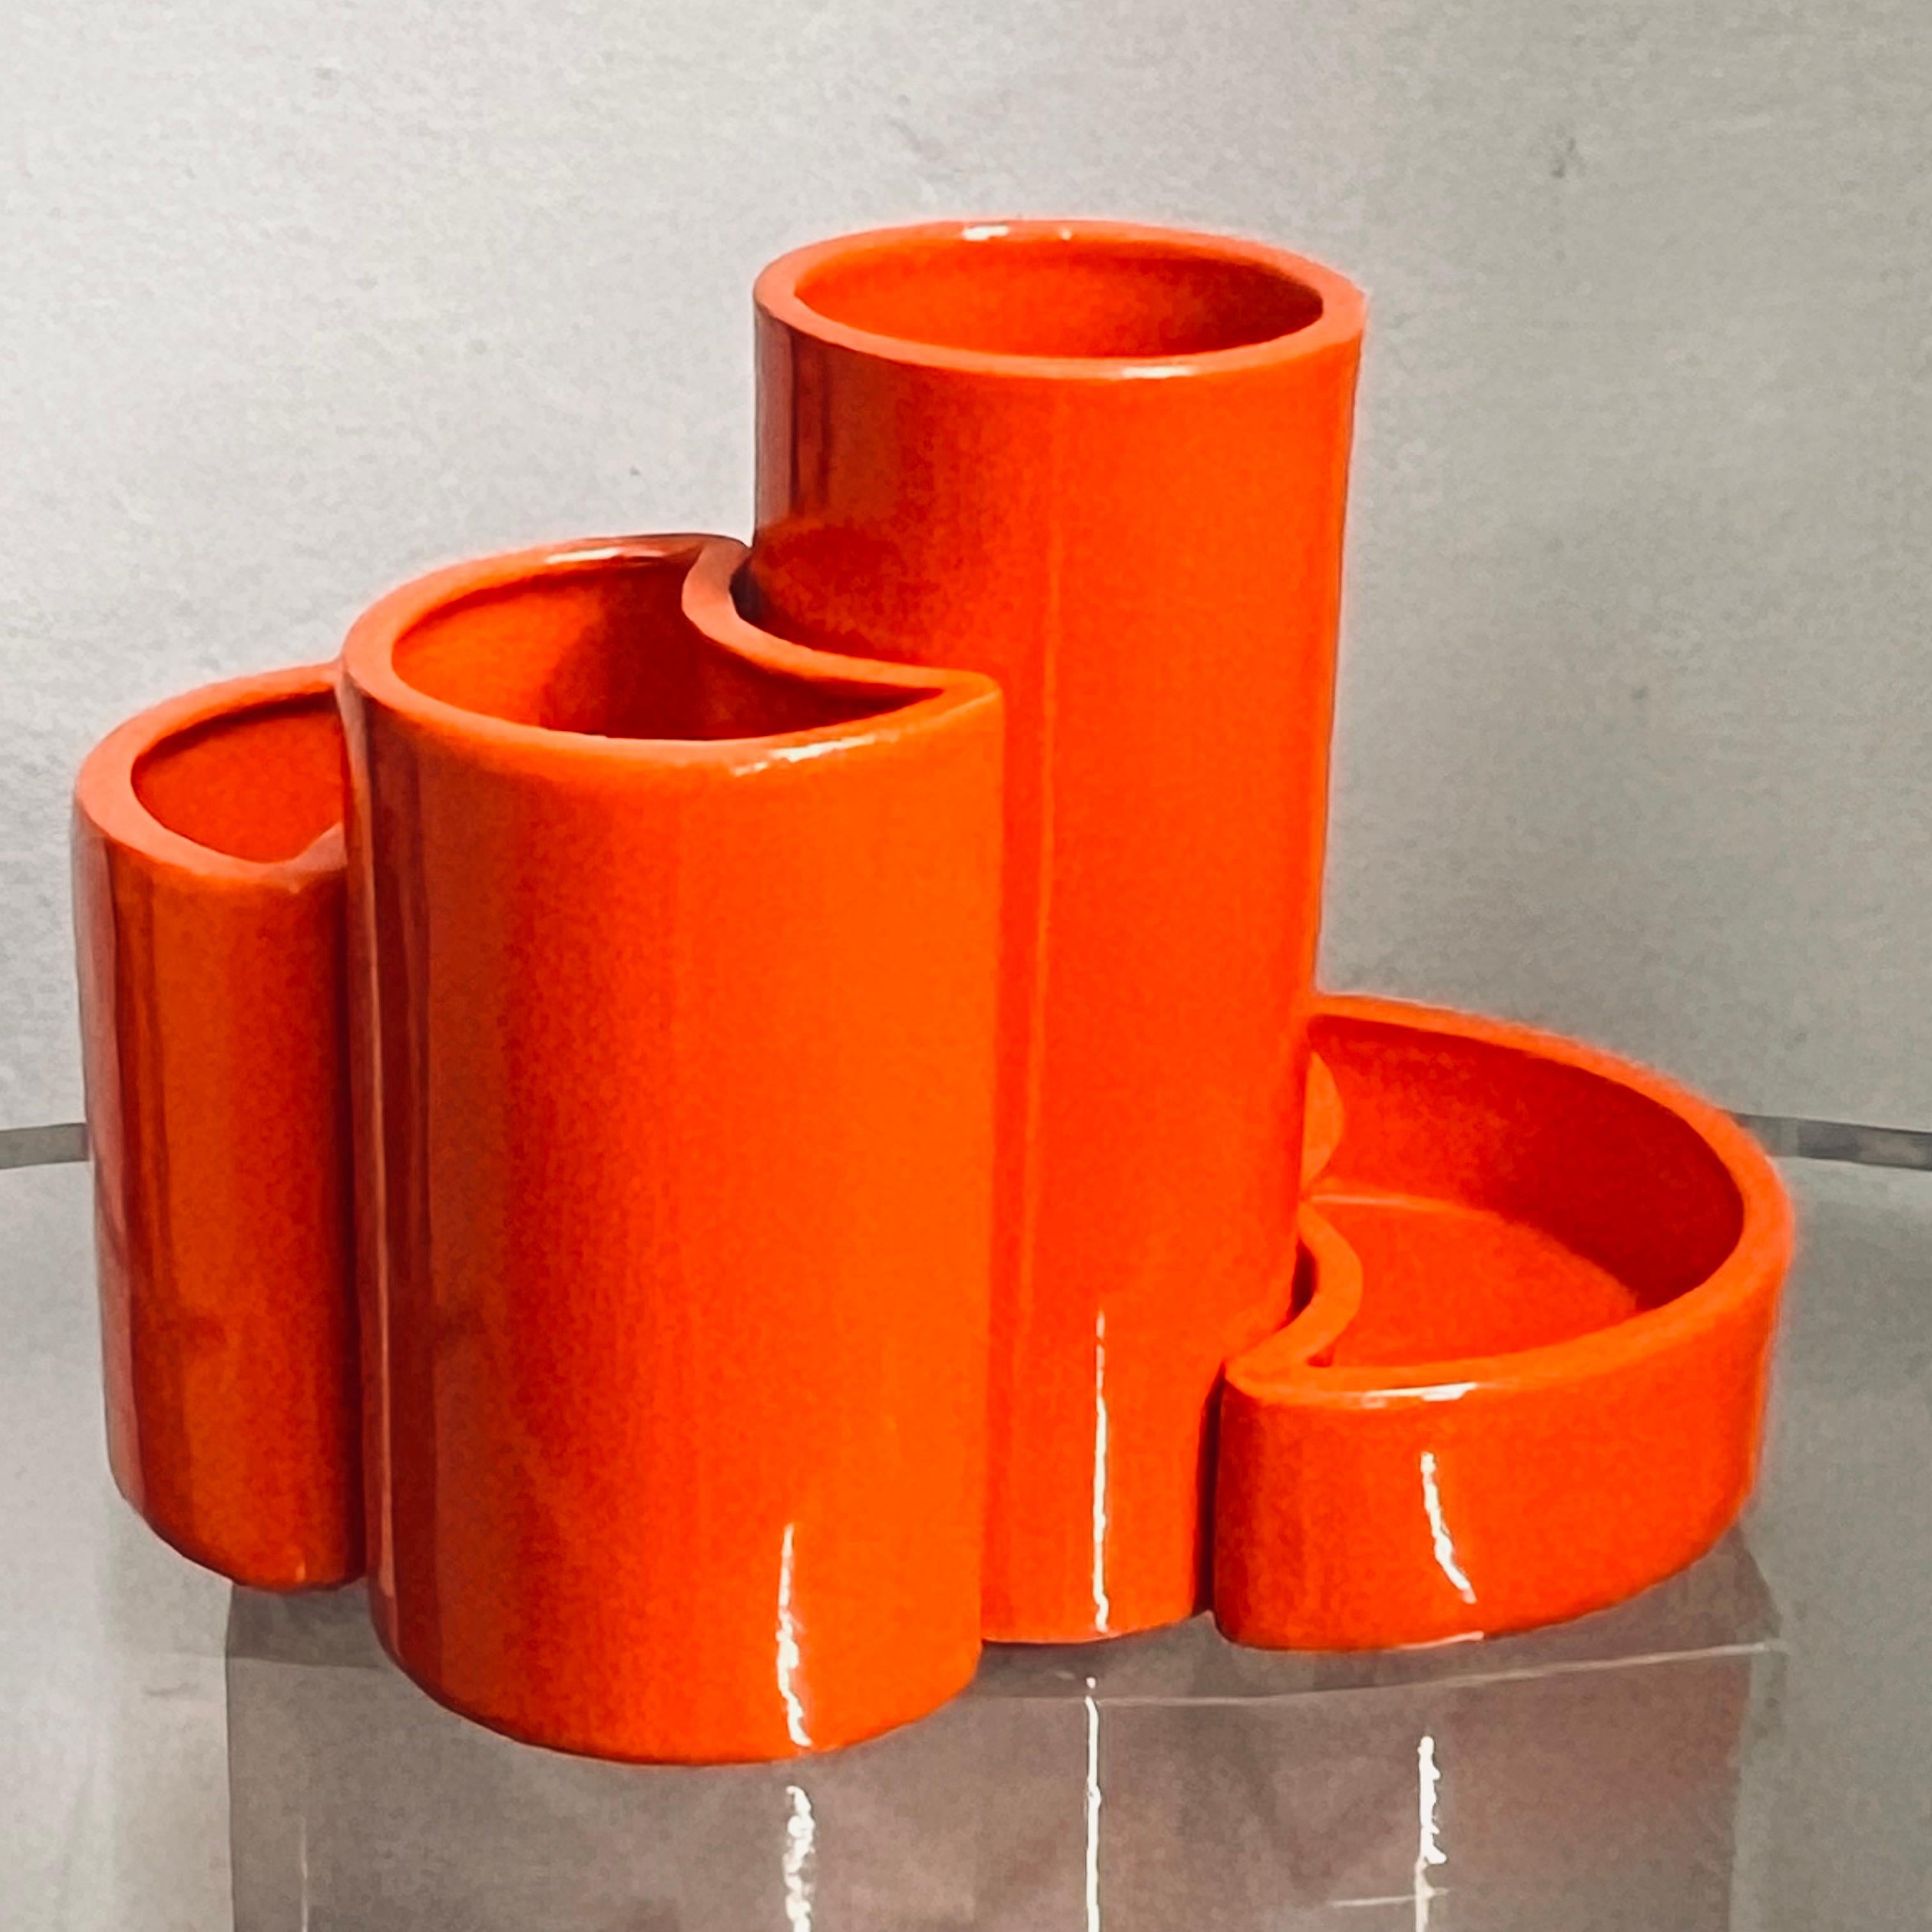 Curious group of five Italian ceramics, bright and cheerful orange and of different shapes and sizes that make up a single spiral centerpiece.
On the bottom, all of them are covered with light cloth, except for two that appear to bear a poorly